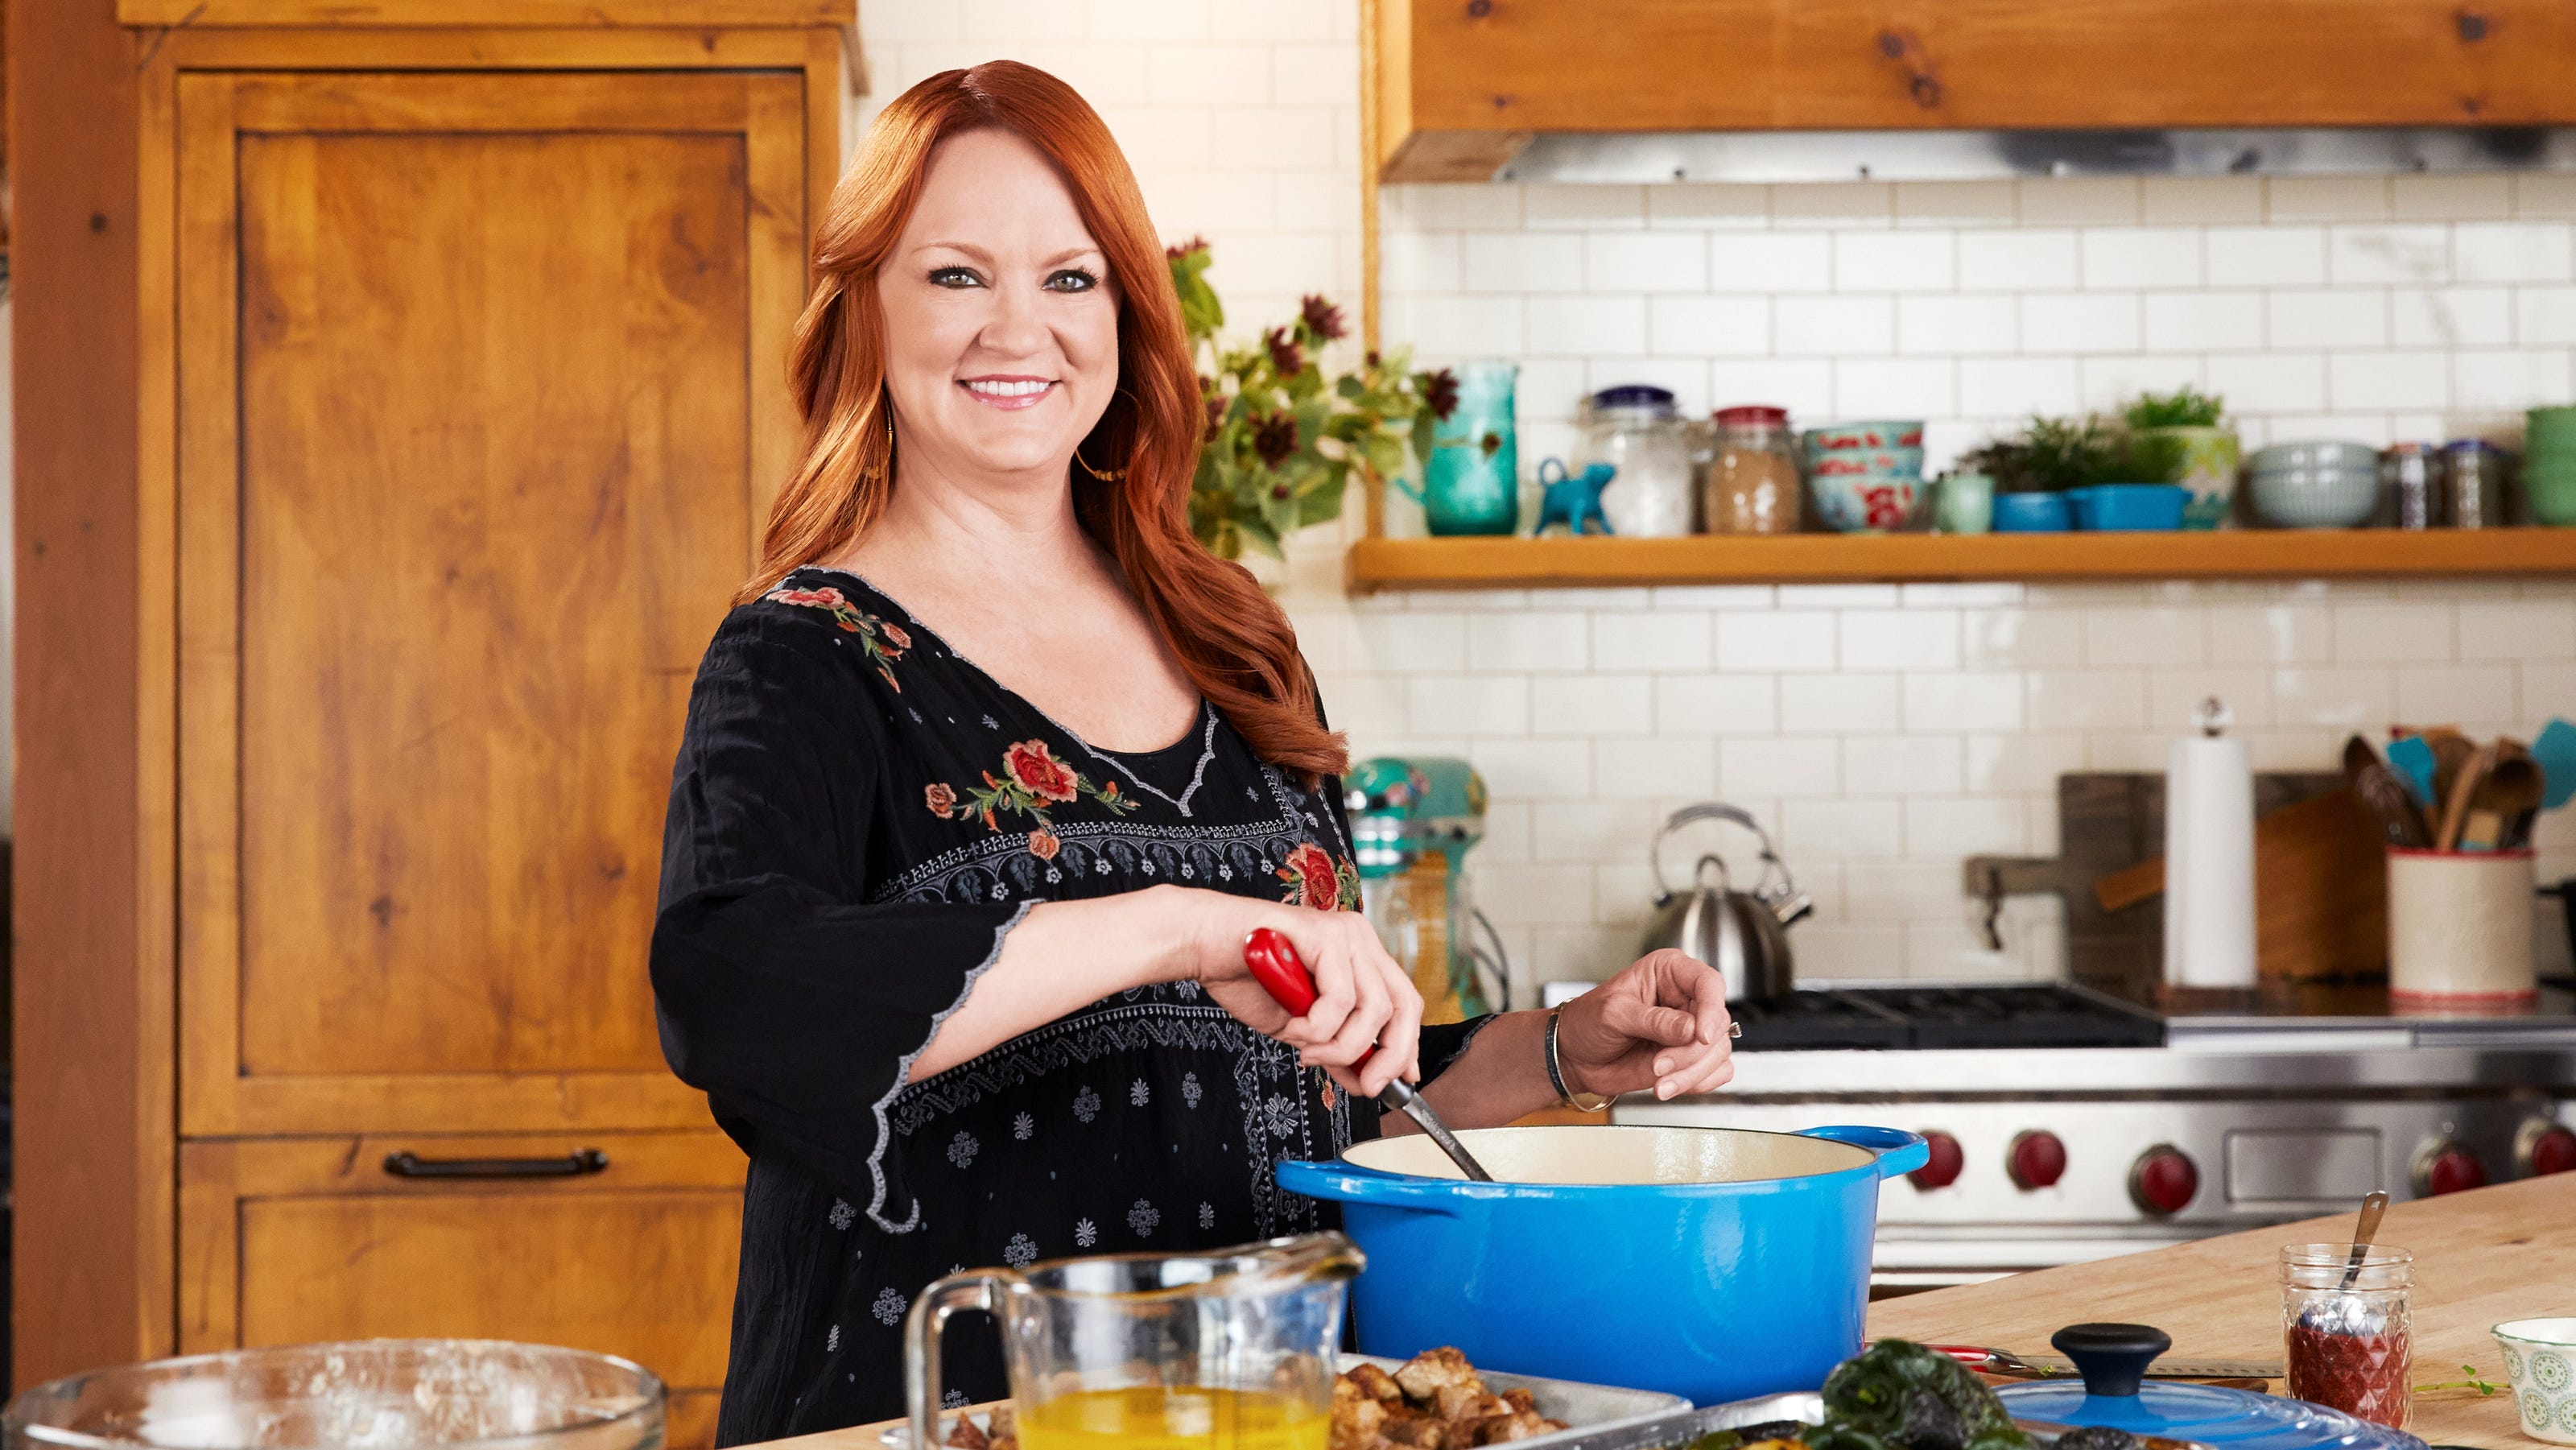 You were everything': Ree Drummond mourns the death of her 'wonde...